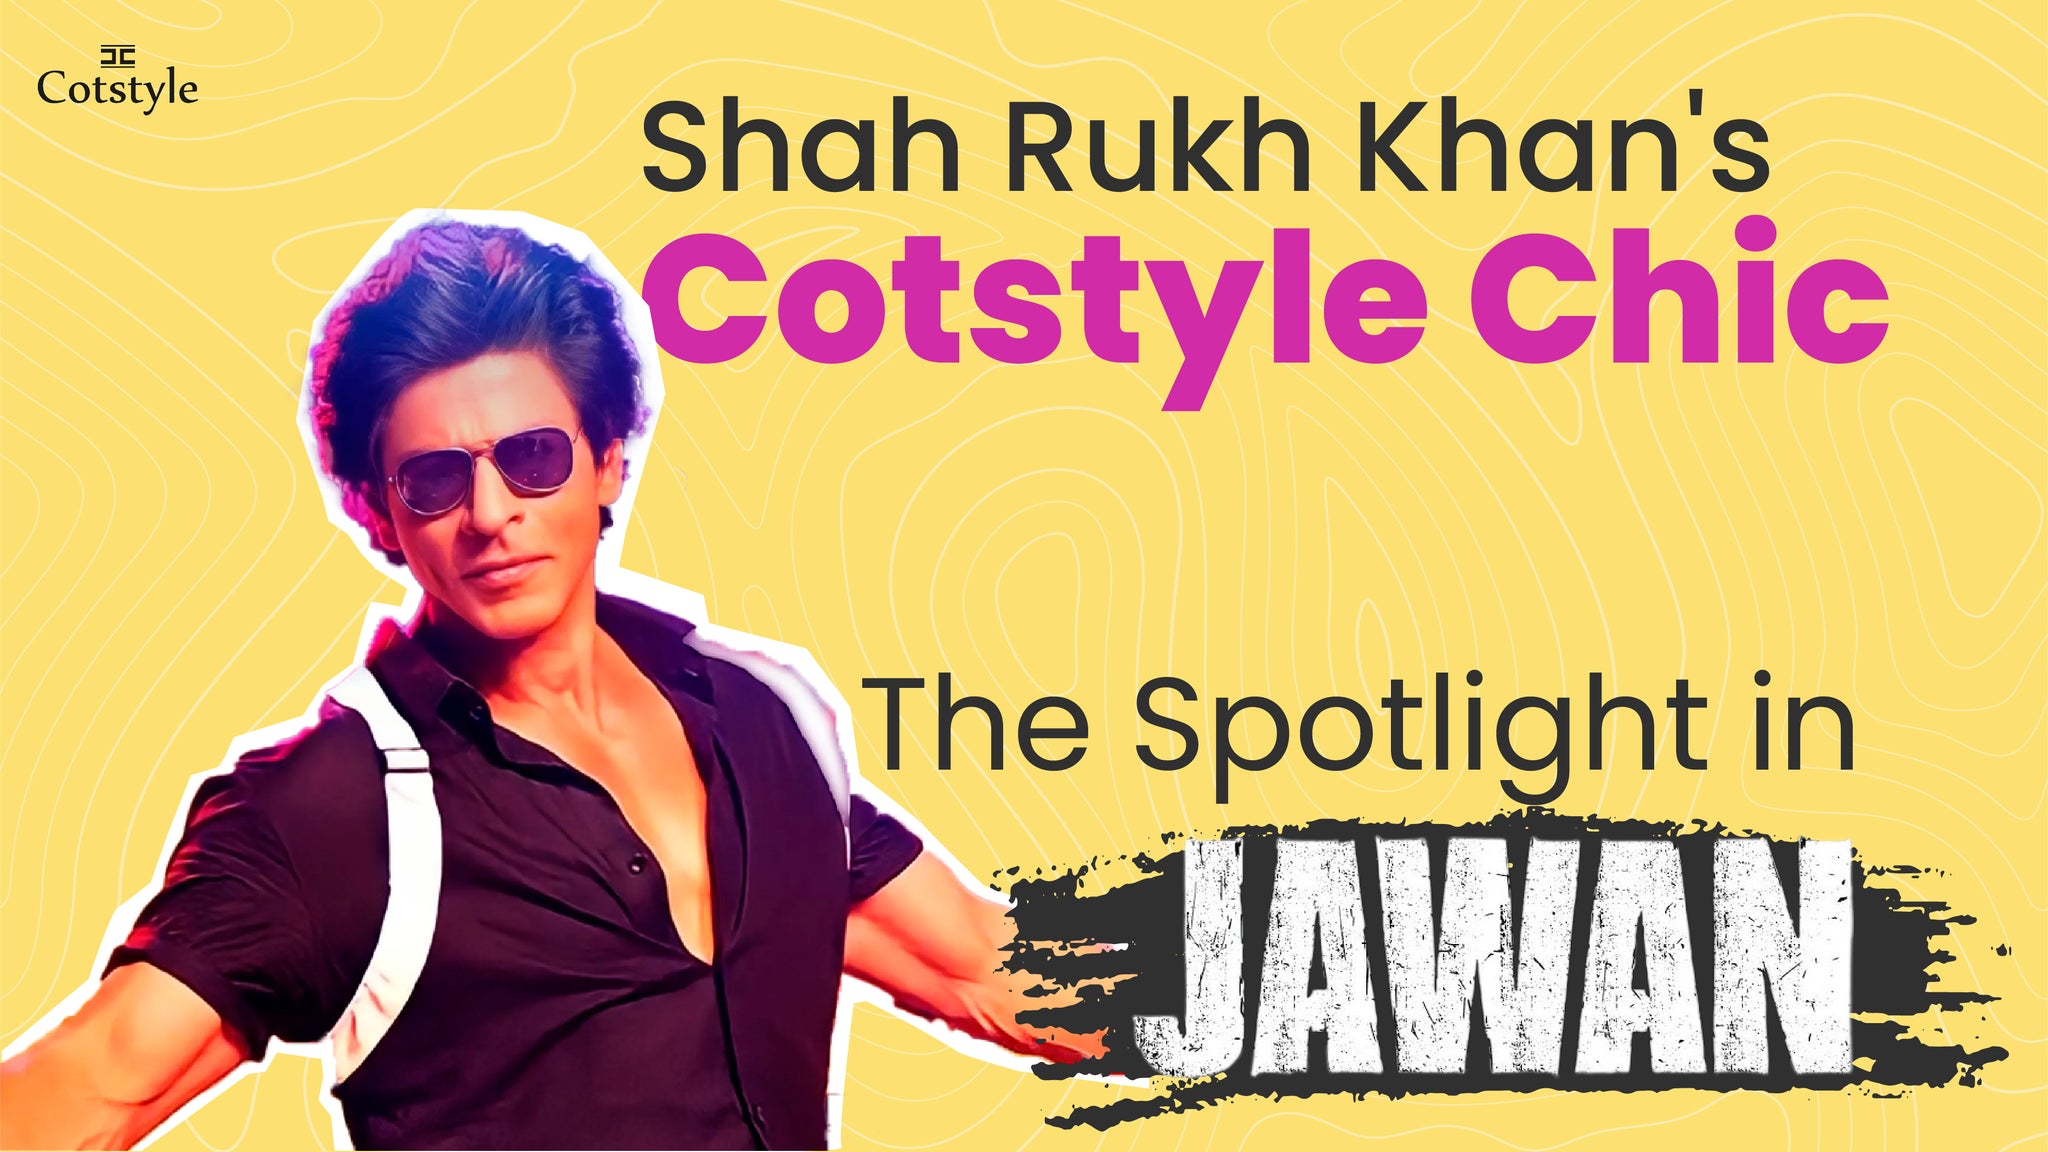 Shah Rukh Khan's Cotstyle Chic